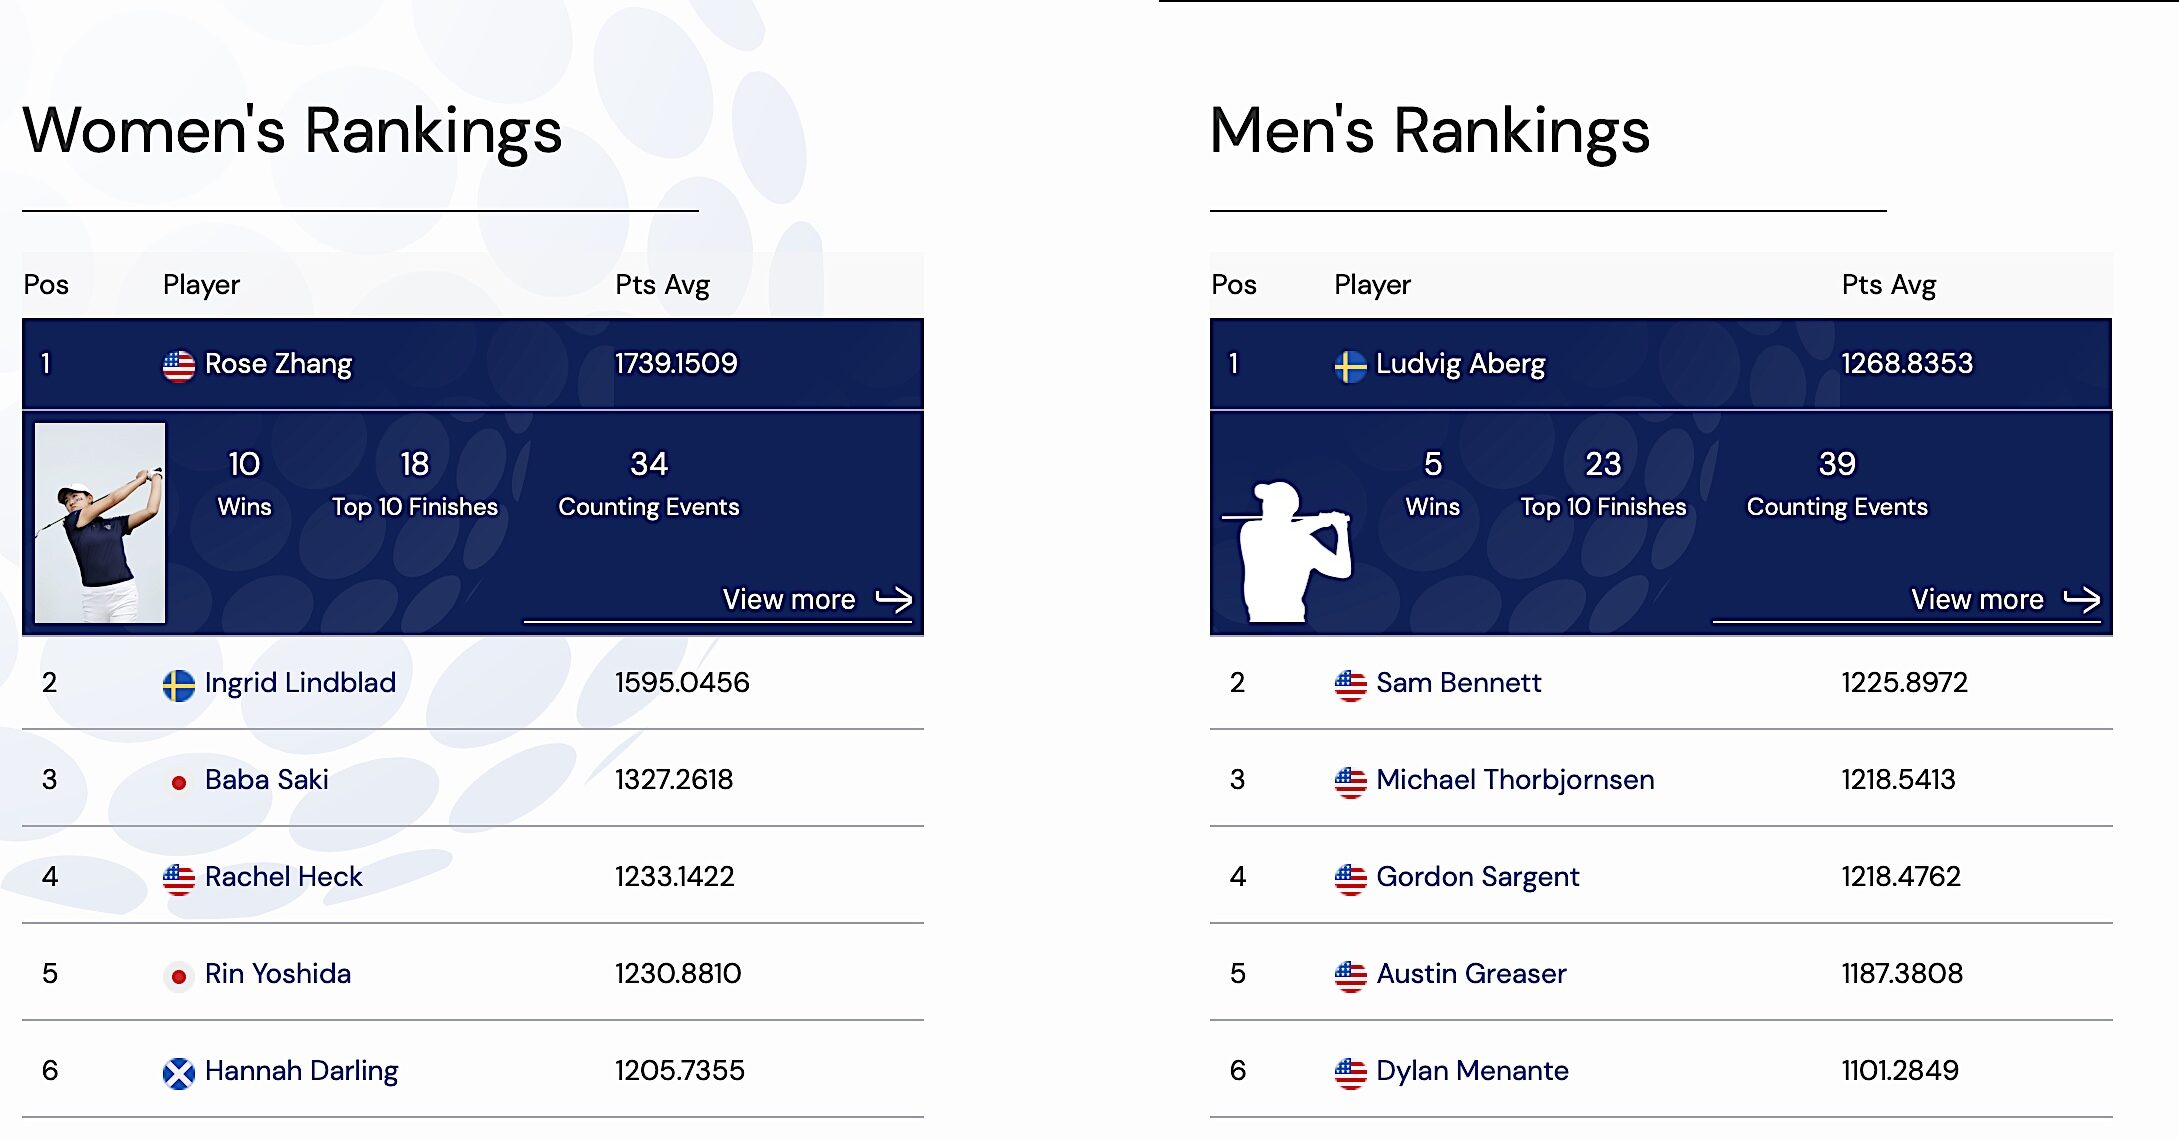 What is WAGR World Amateur Golf Ranking?